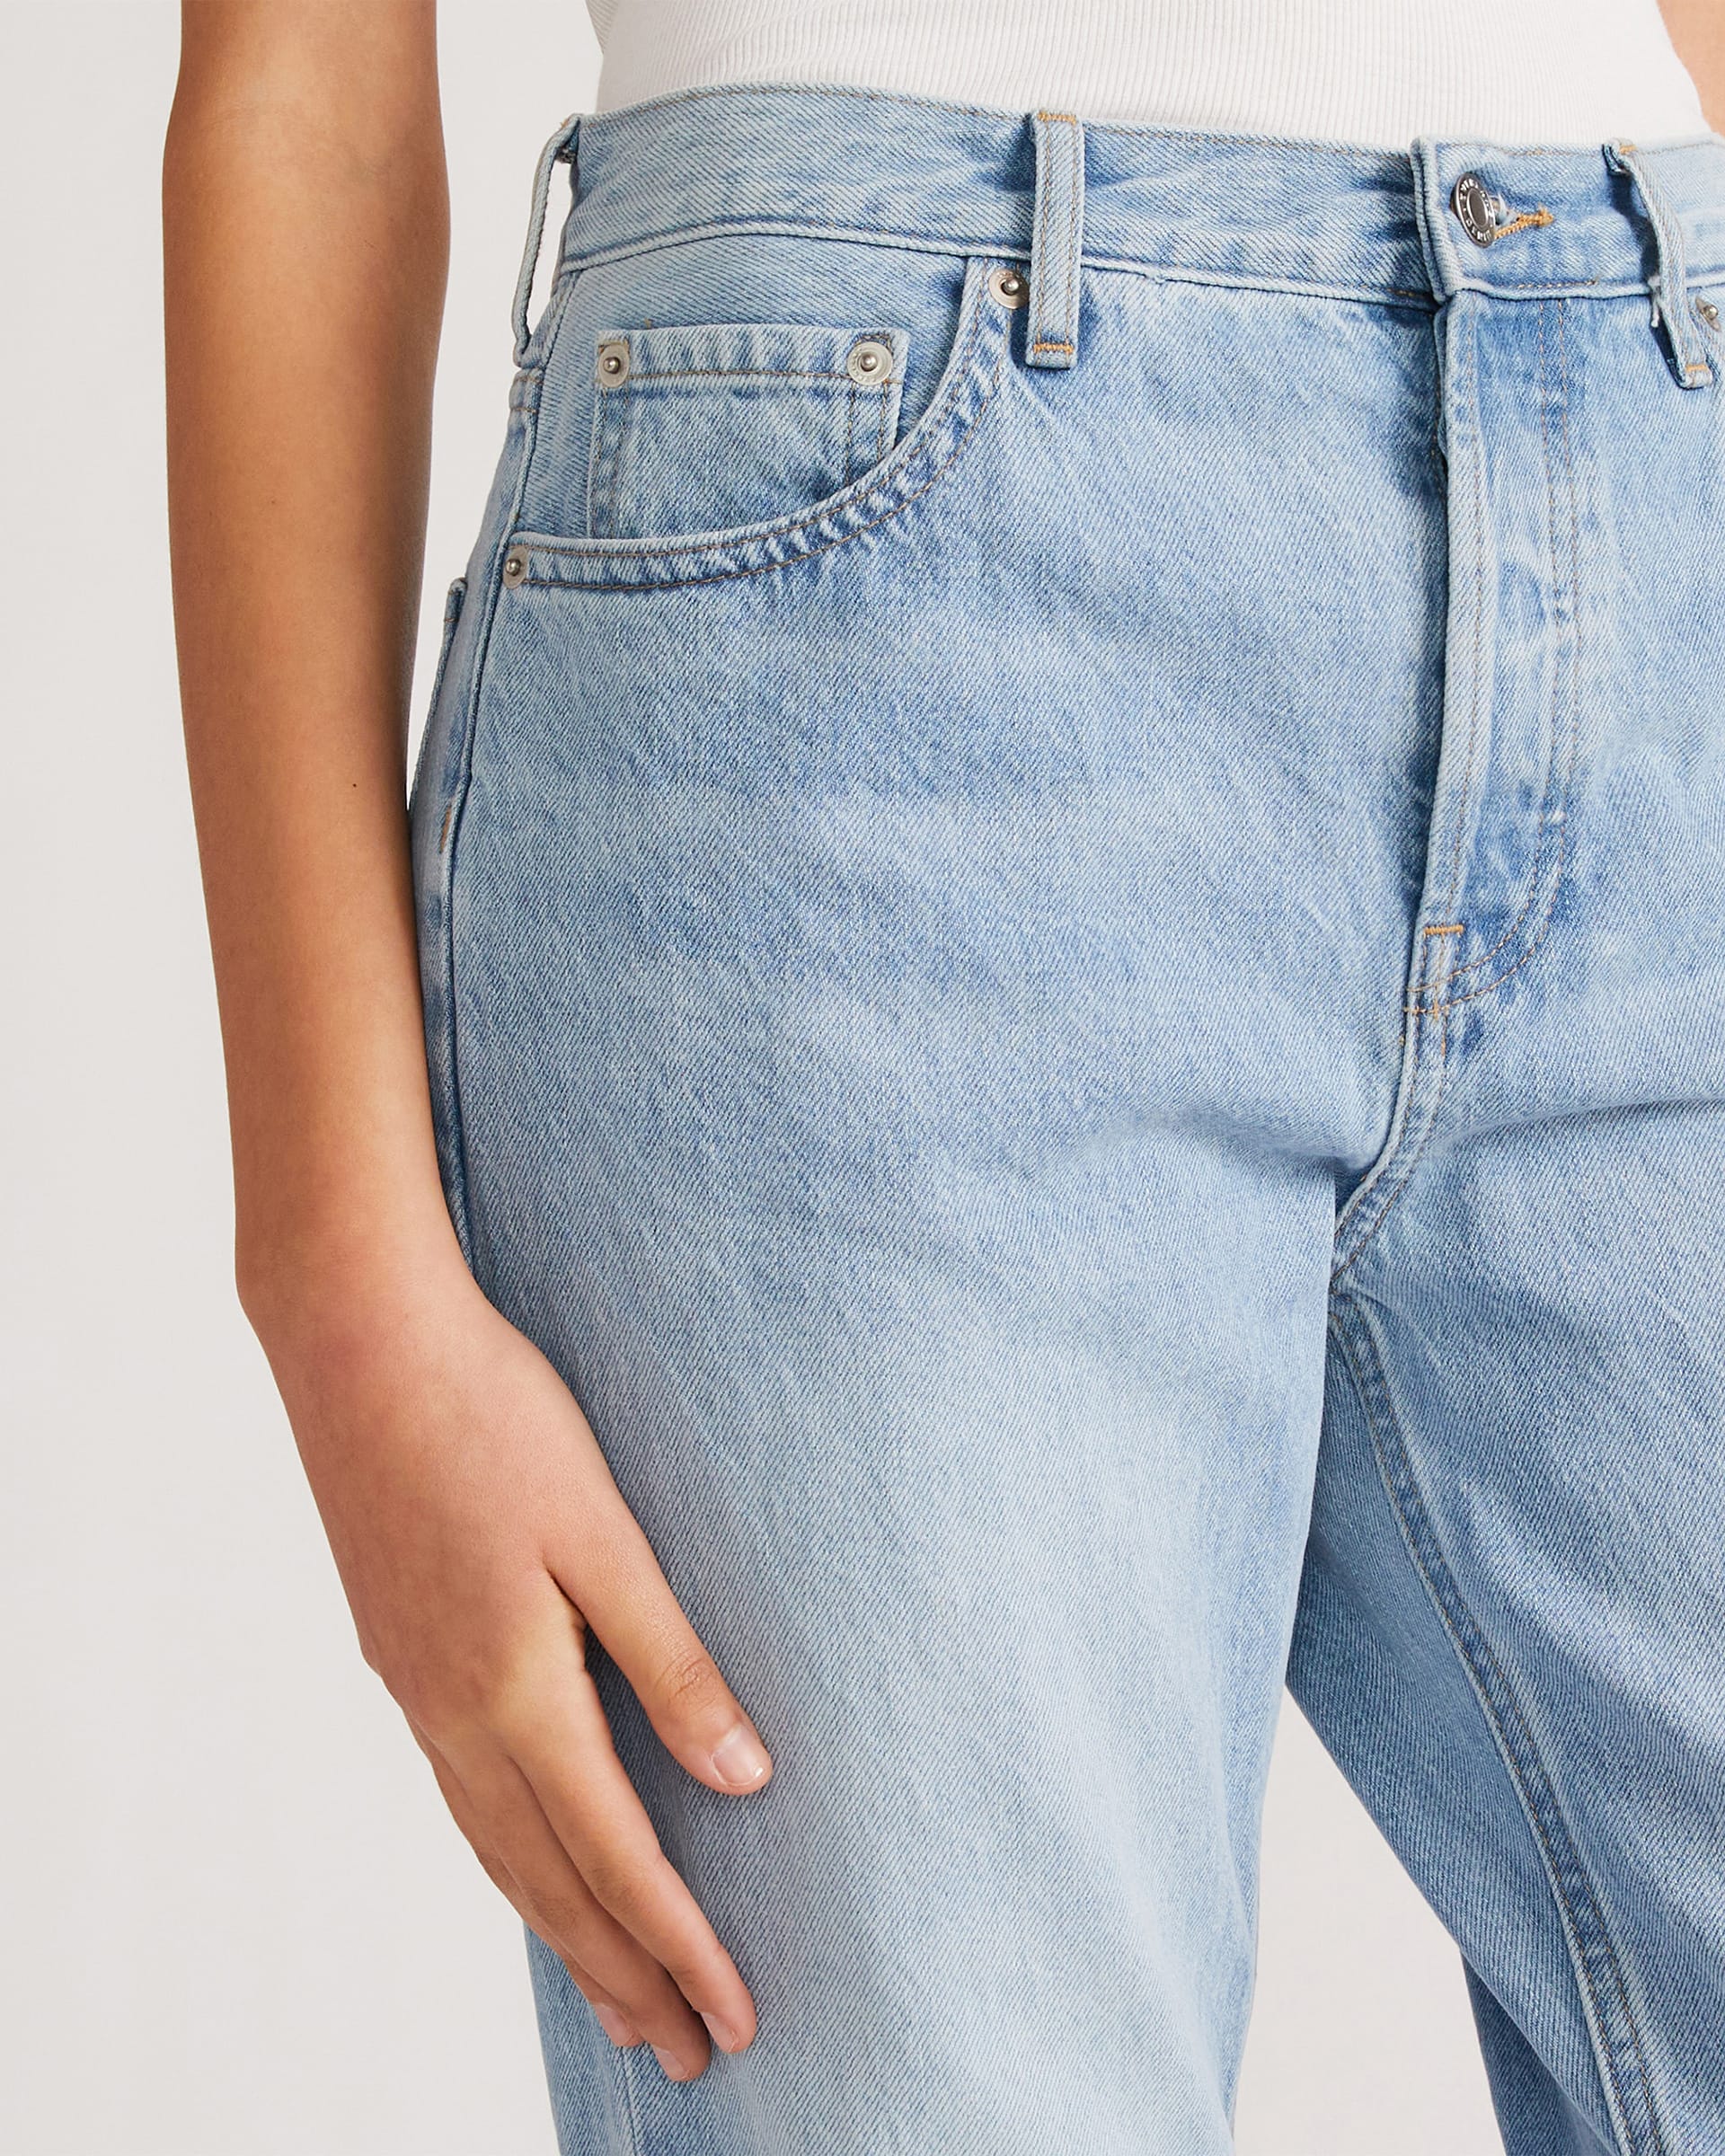 The ’90s Cheeky® Jean Vintage Sunbleached Blue – Everlane